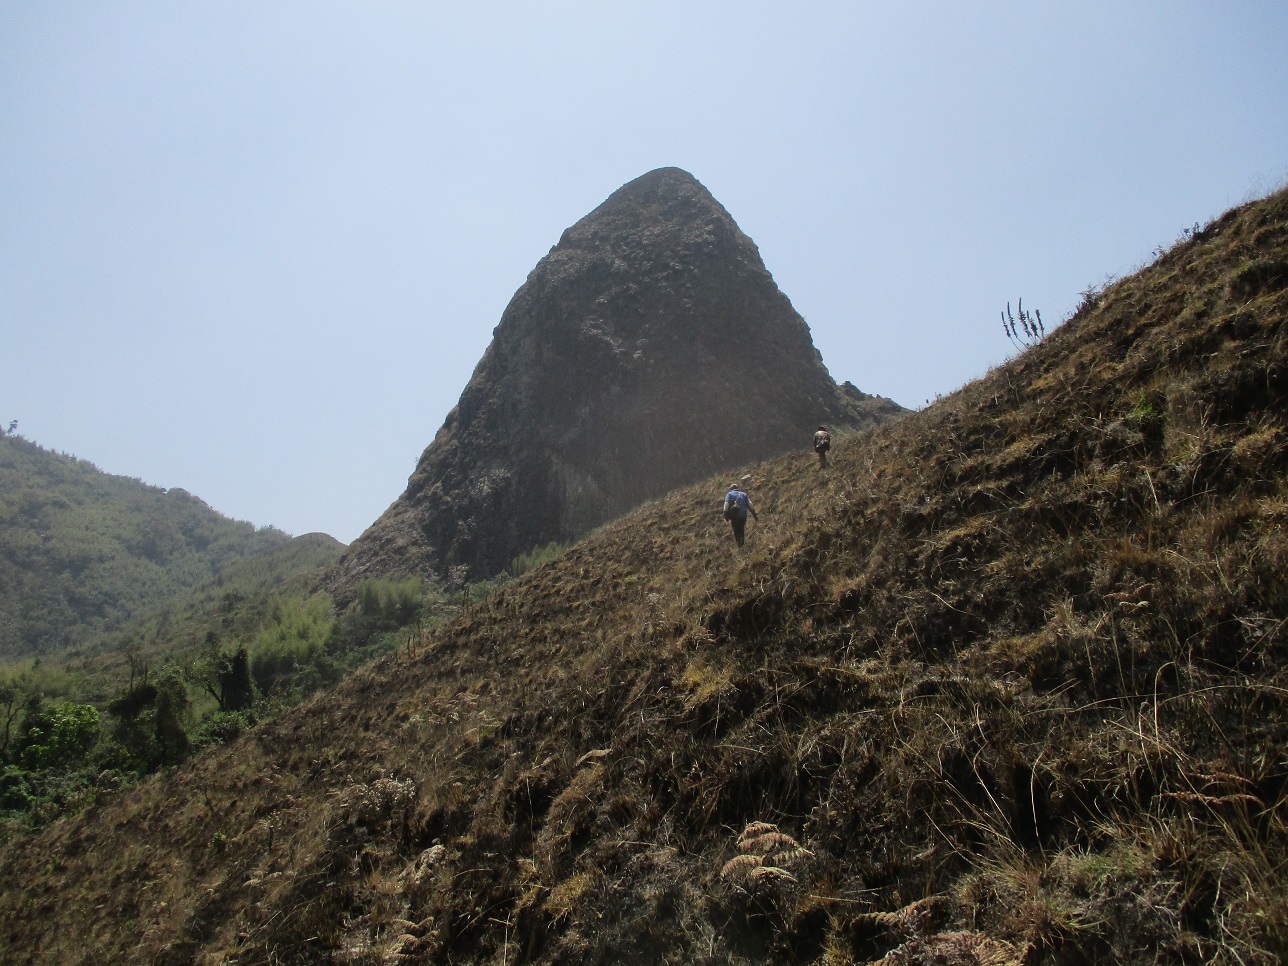 Cameroon Mt. Bamboutos Landscape showing the mountain tooth